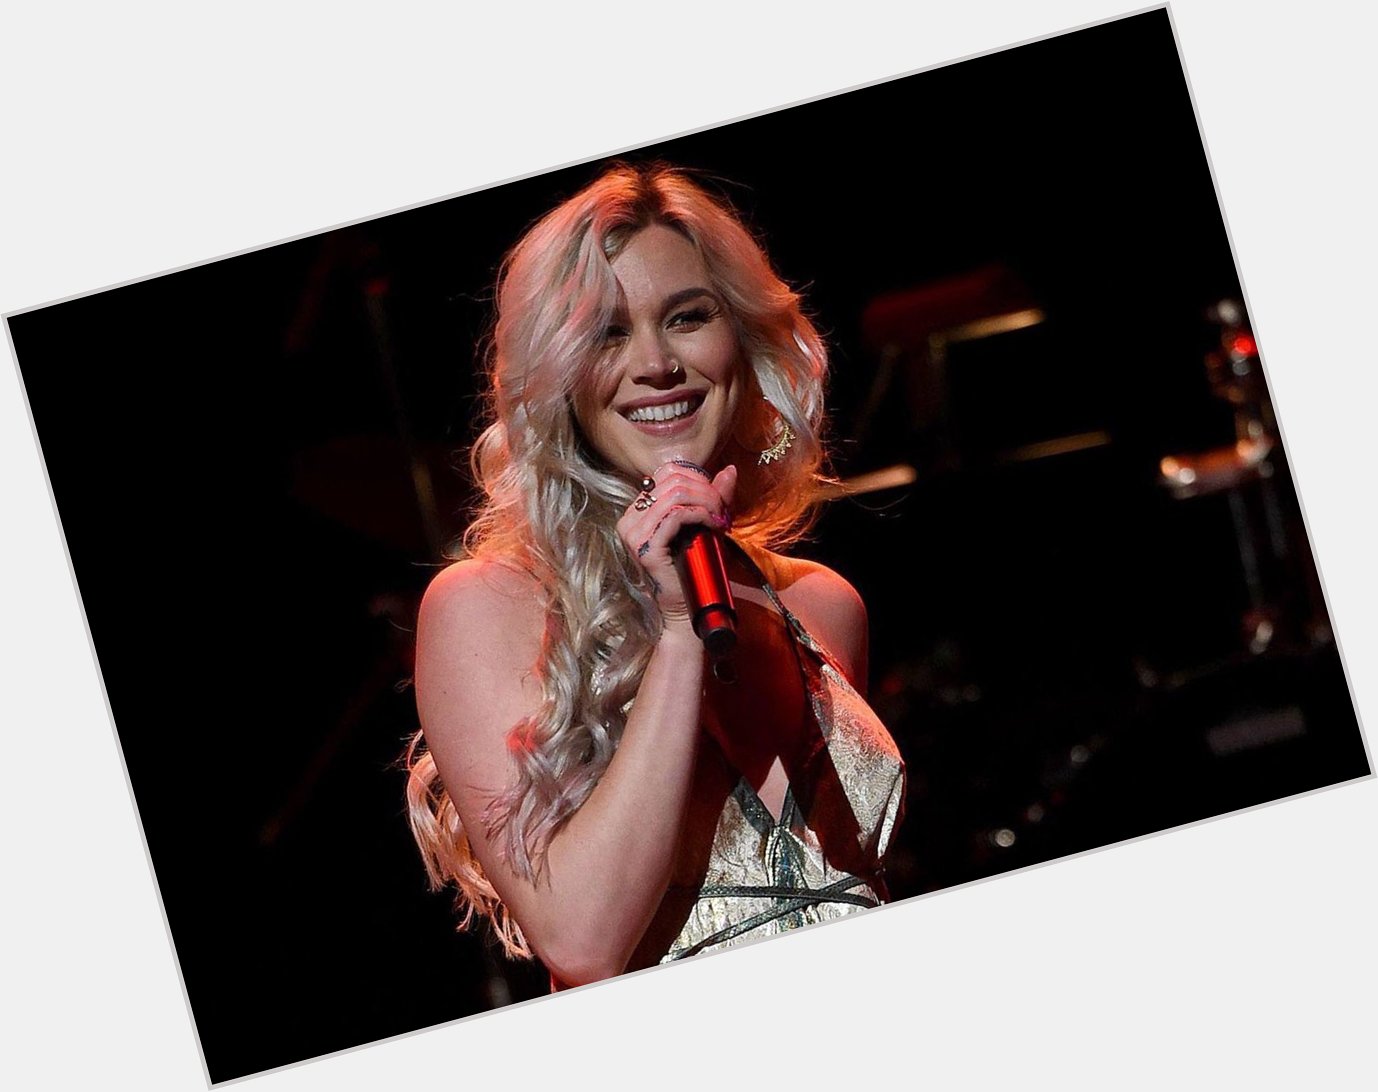 Happy birthday to British singer, songwriter, and actress Joss Stone, born April 11, 1987. 